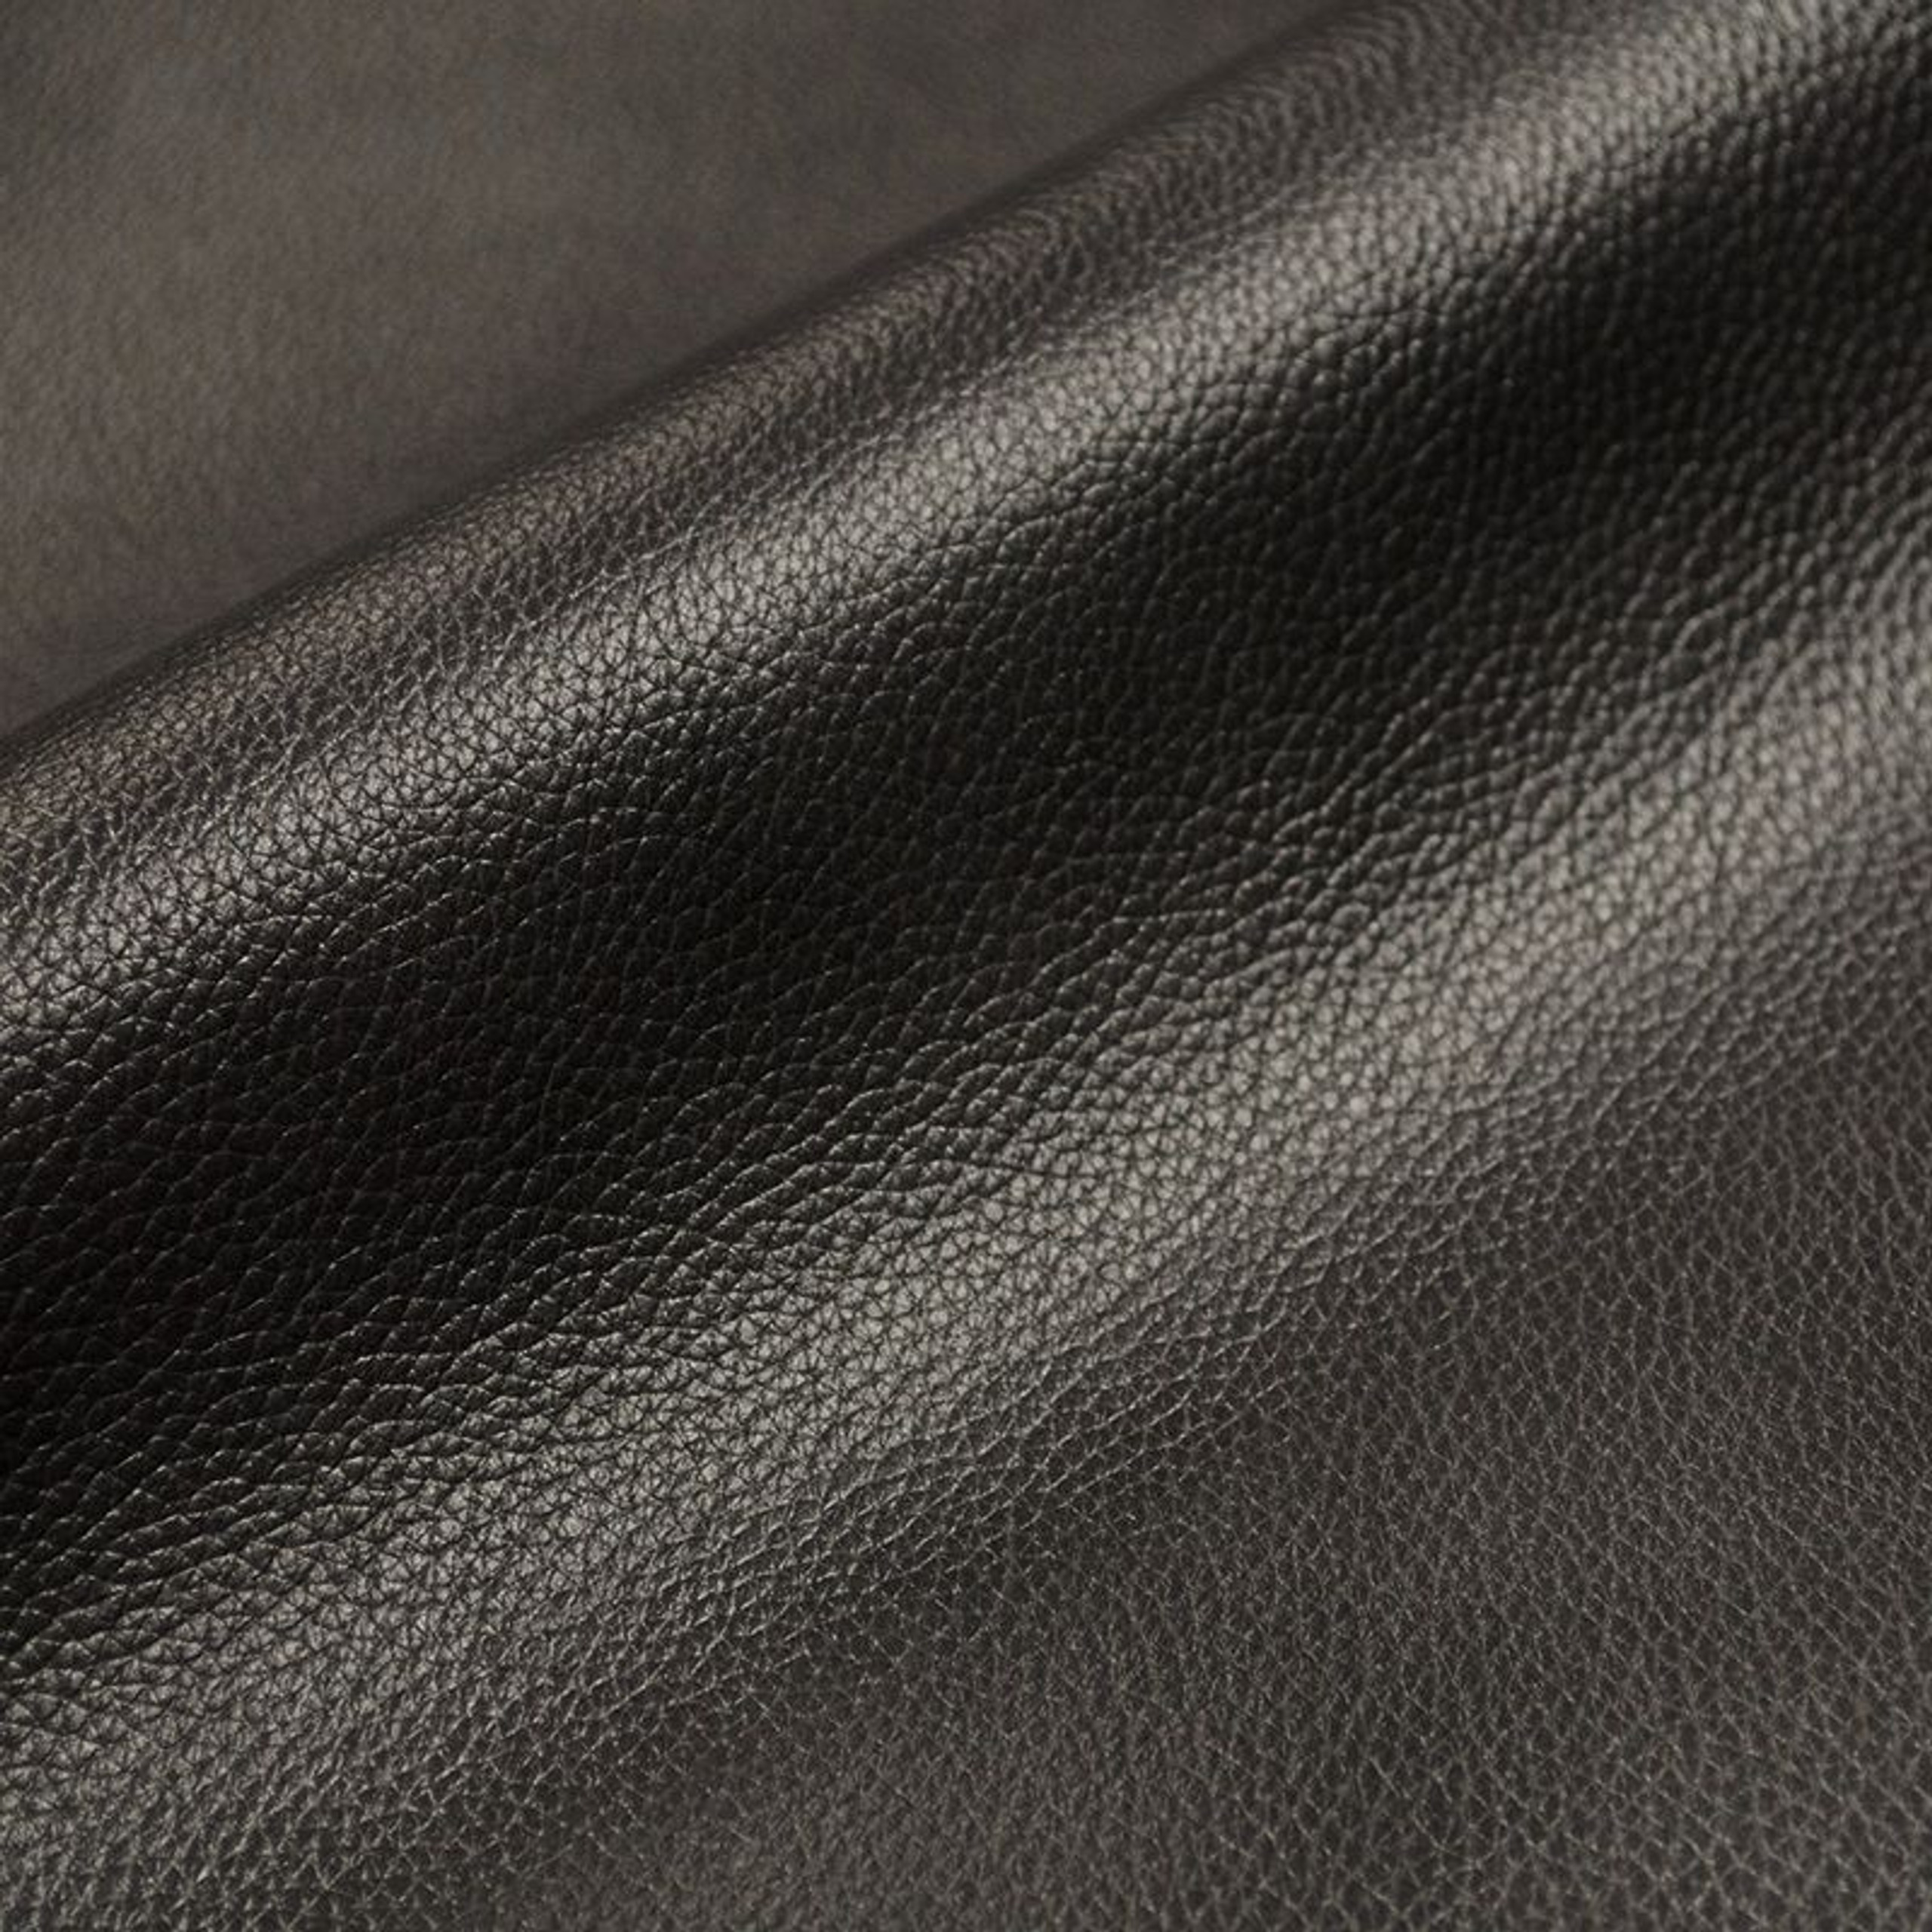 hair on hide upholstery leather